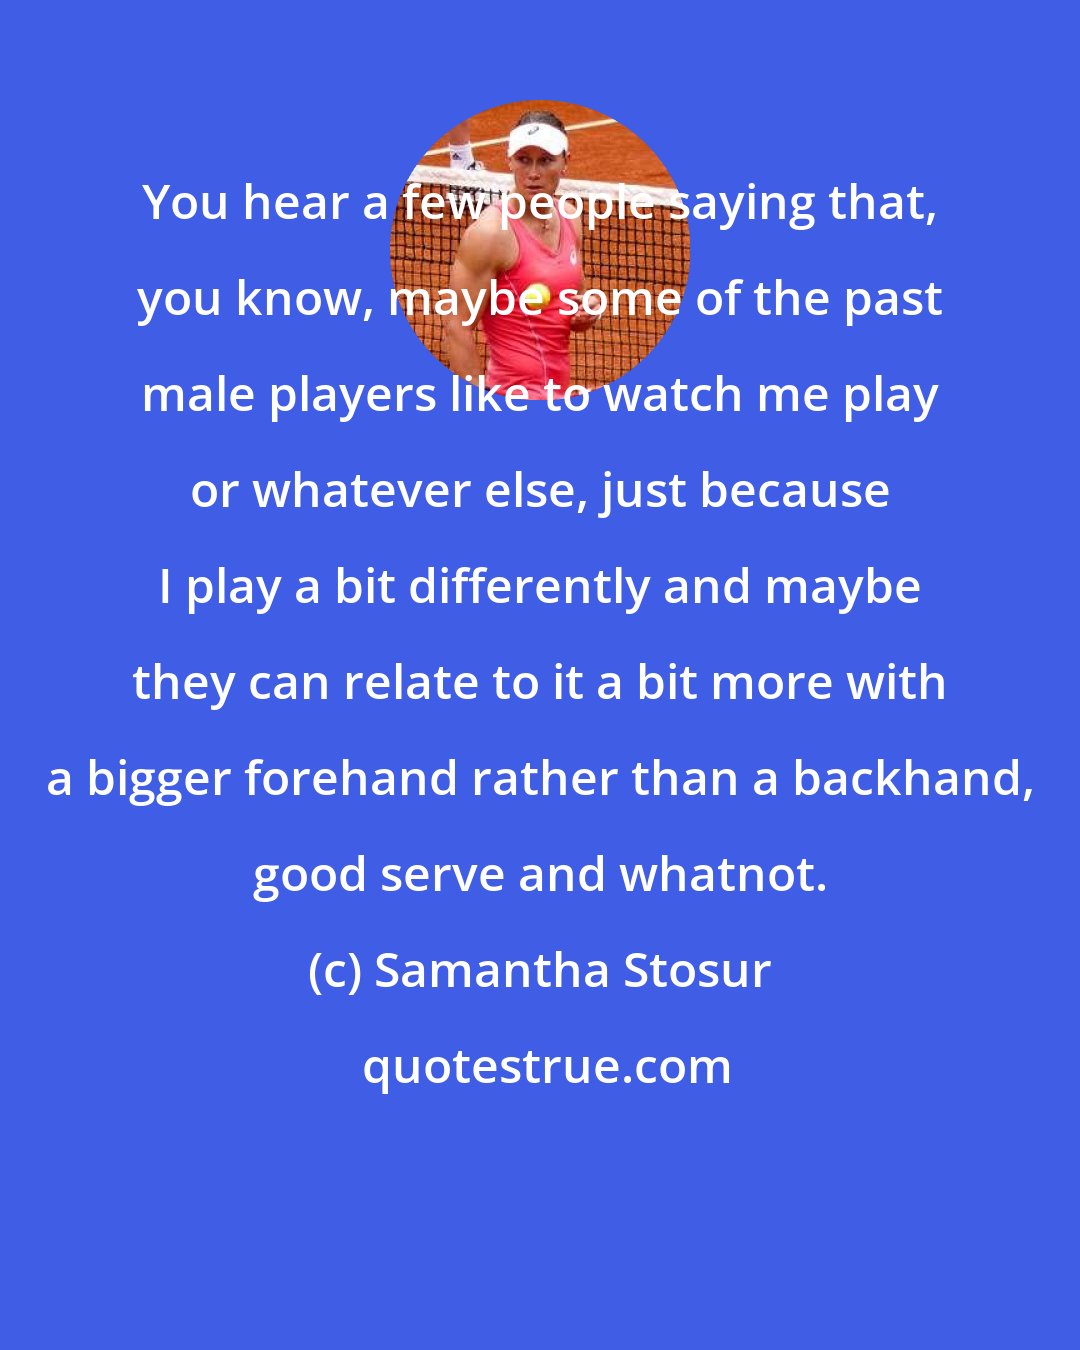 Samantha Stosur: You hear a few people saying that, you know, maybe some of the past male players like to watch me play or whatever else, just because I play a bit differently and maybe they can relate to it a bit more with a bigger forehand rather than a backhand, good serve and whatnot.